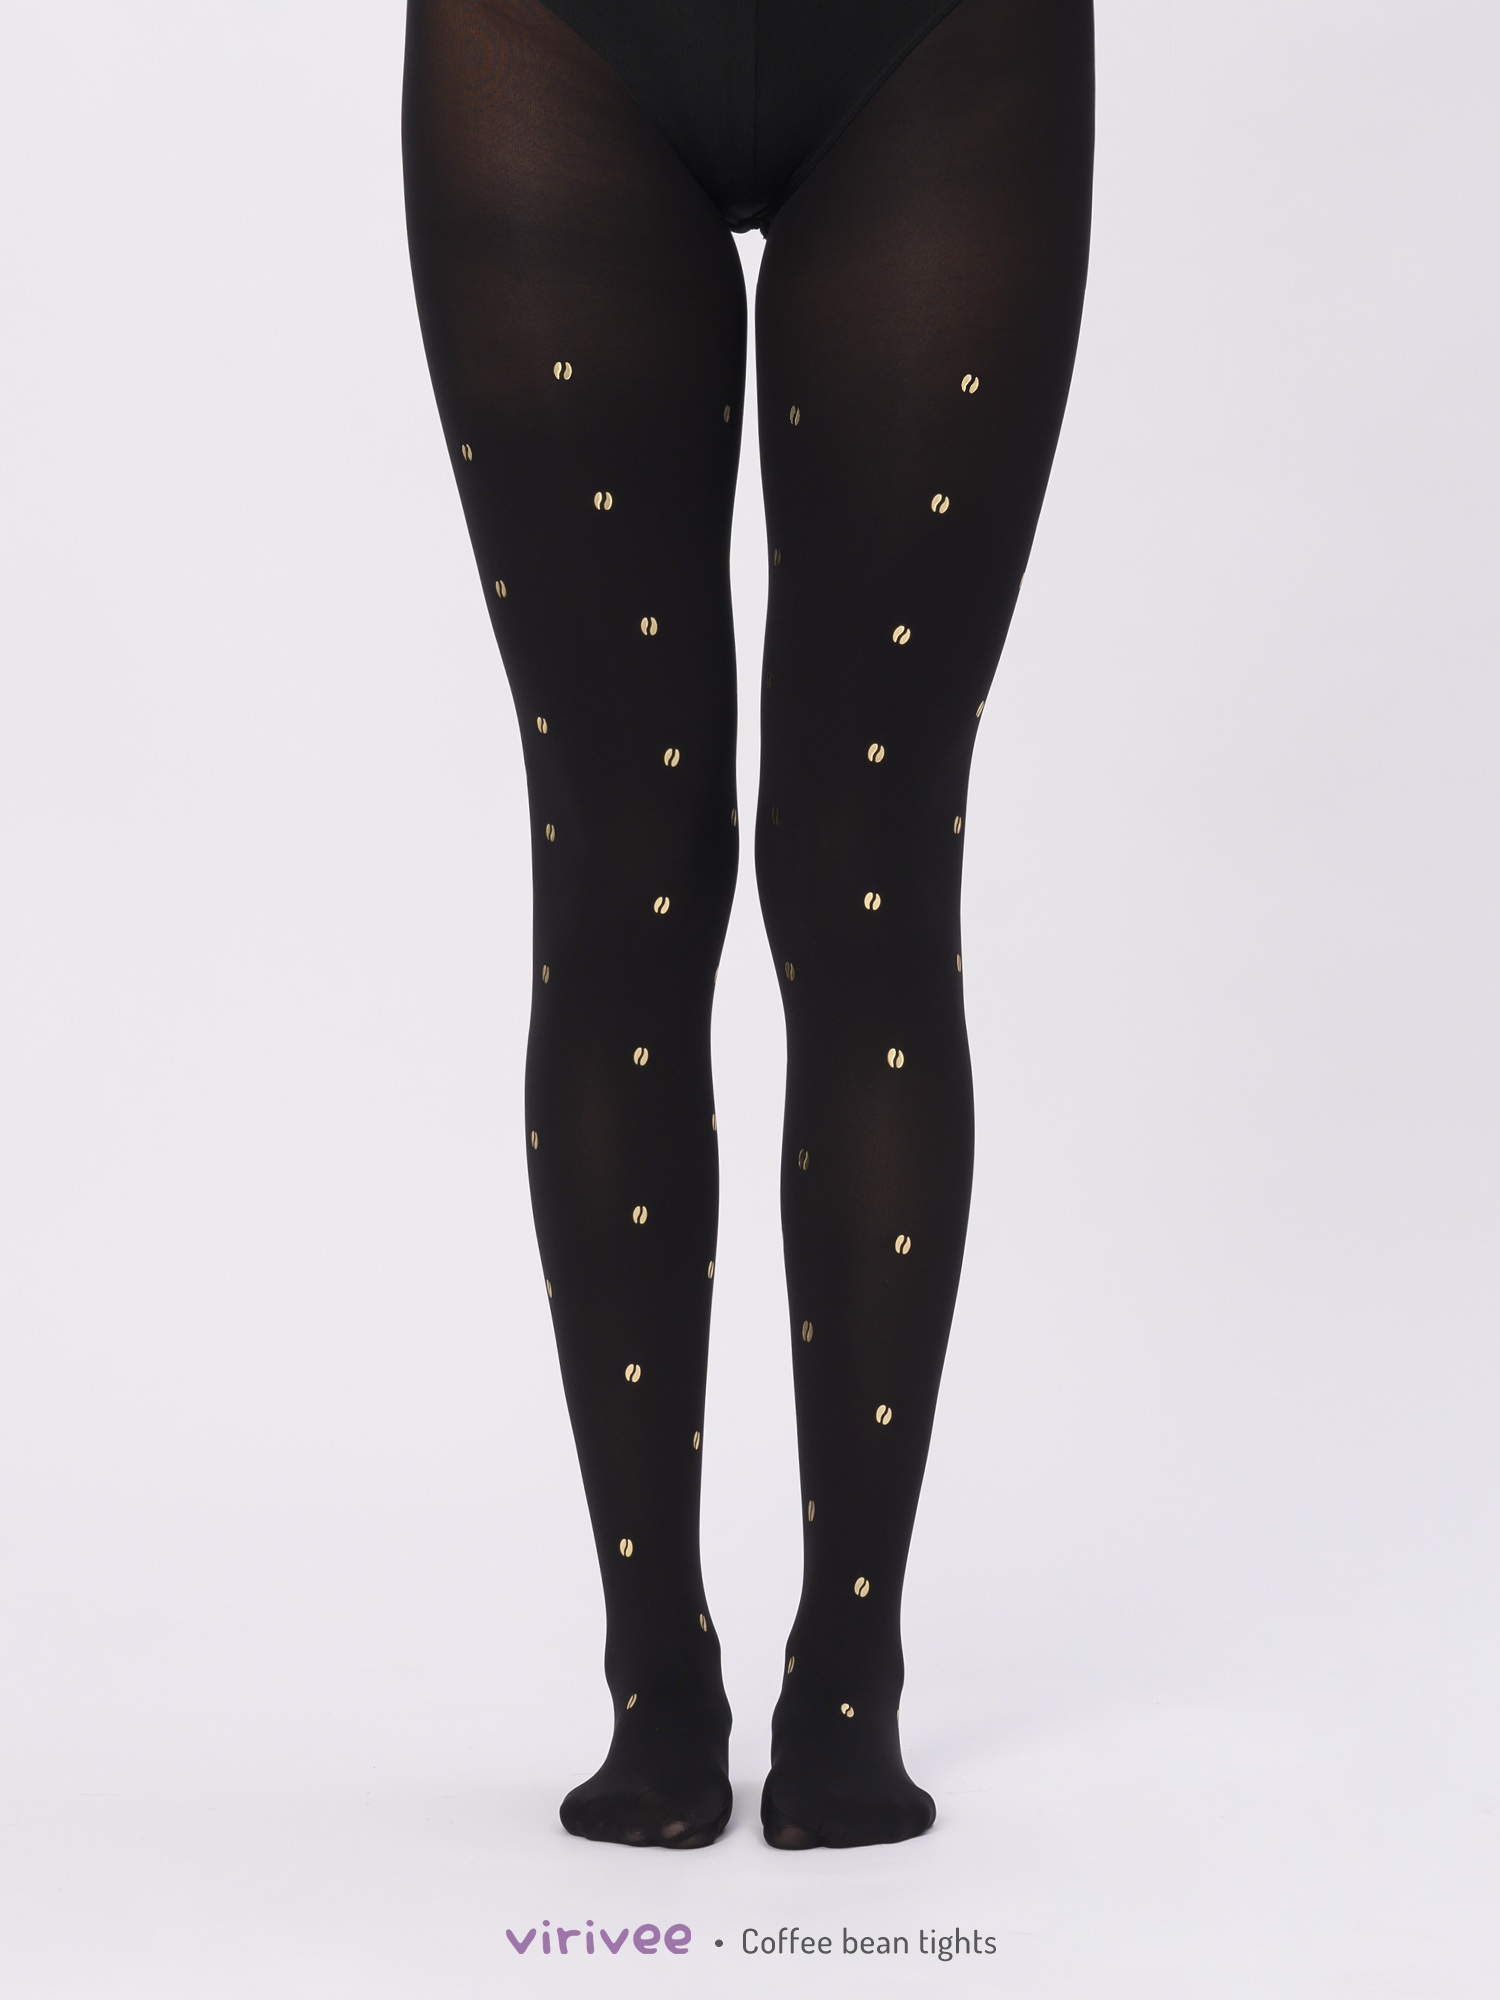 Coffee bean patterned tights, coffee lovers gift